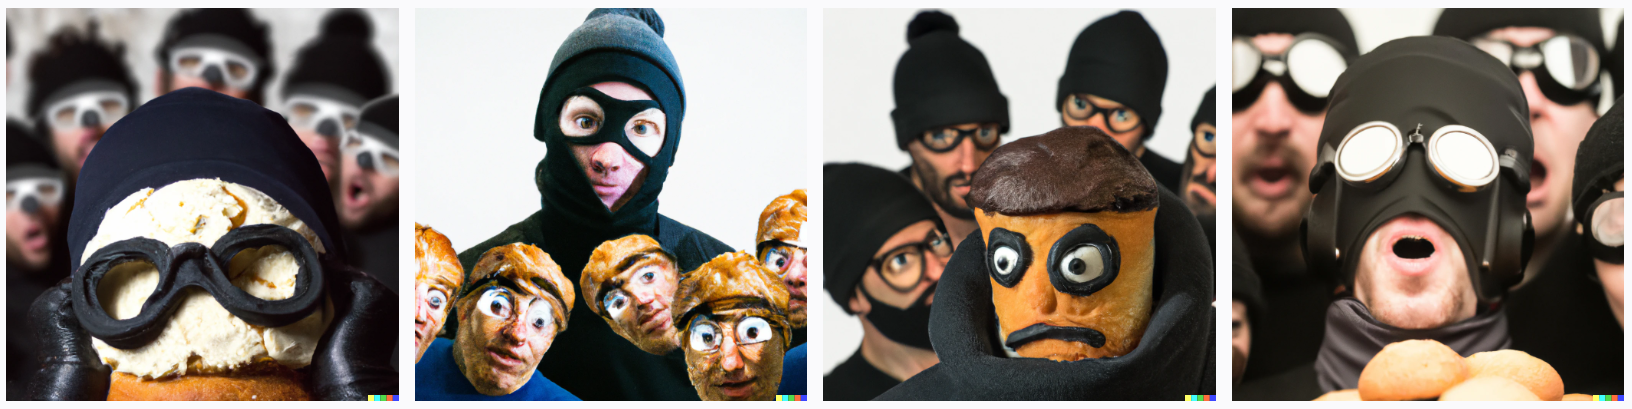 muffin man looking surprised surrounded by group in black ski mask expressionism the muffin man